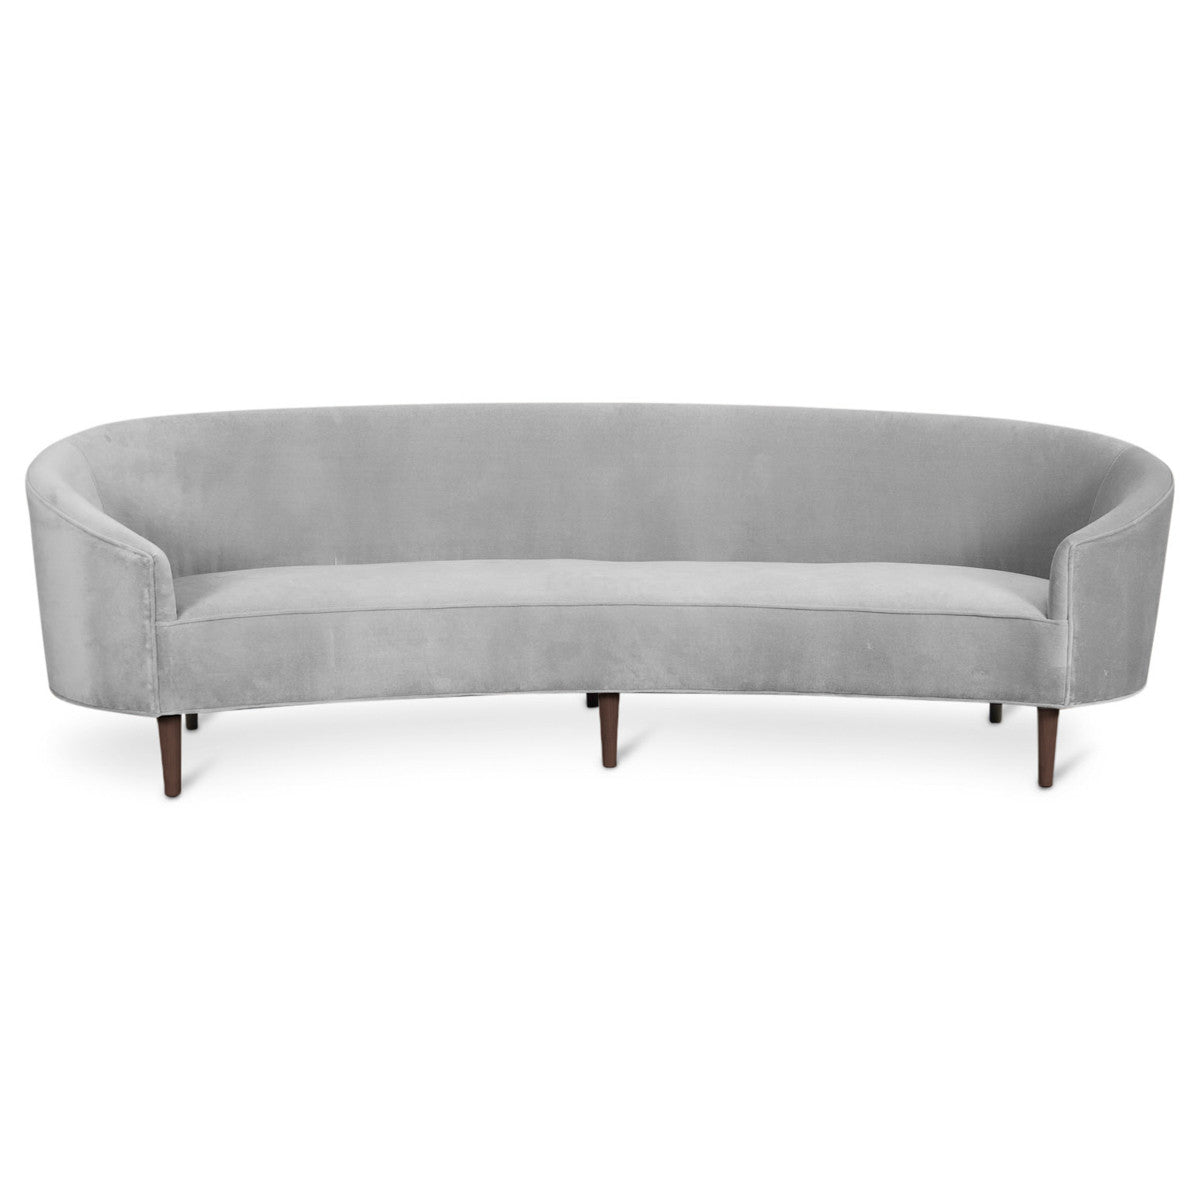 Art Deco Style Crescent Sofa with Curved Arms - ModShop